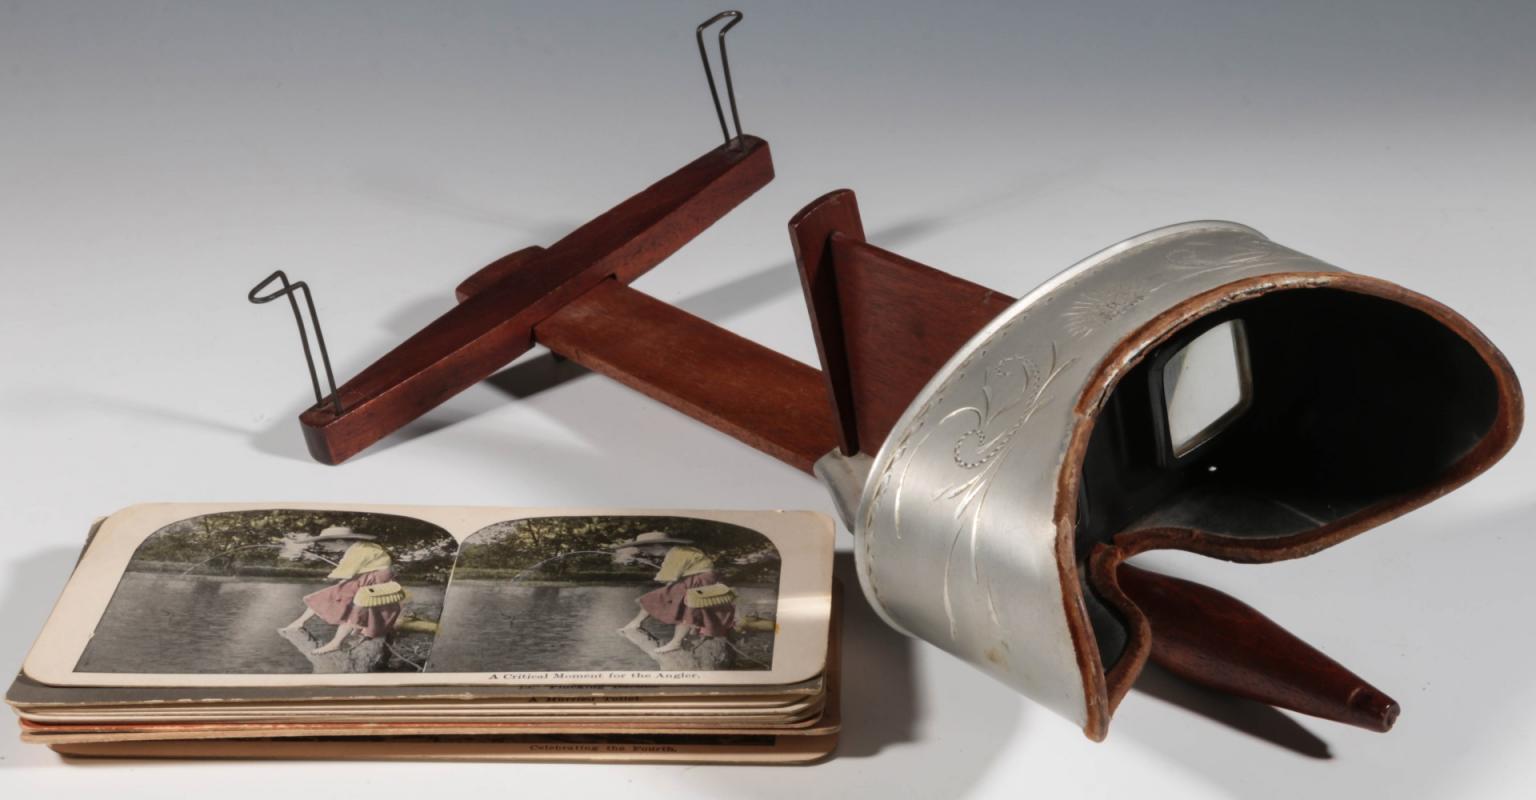 AN ANTIQUE STEREOVIEWER WITH CARDS